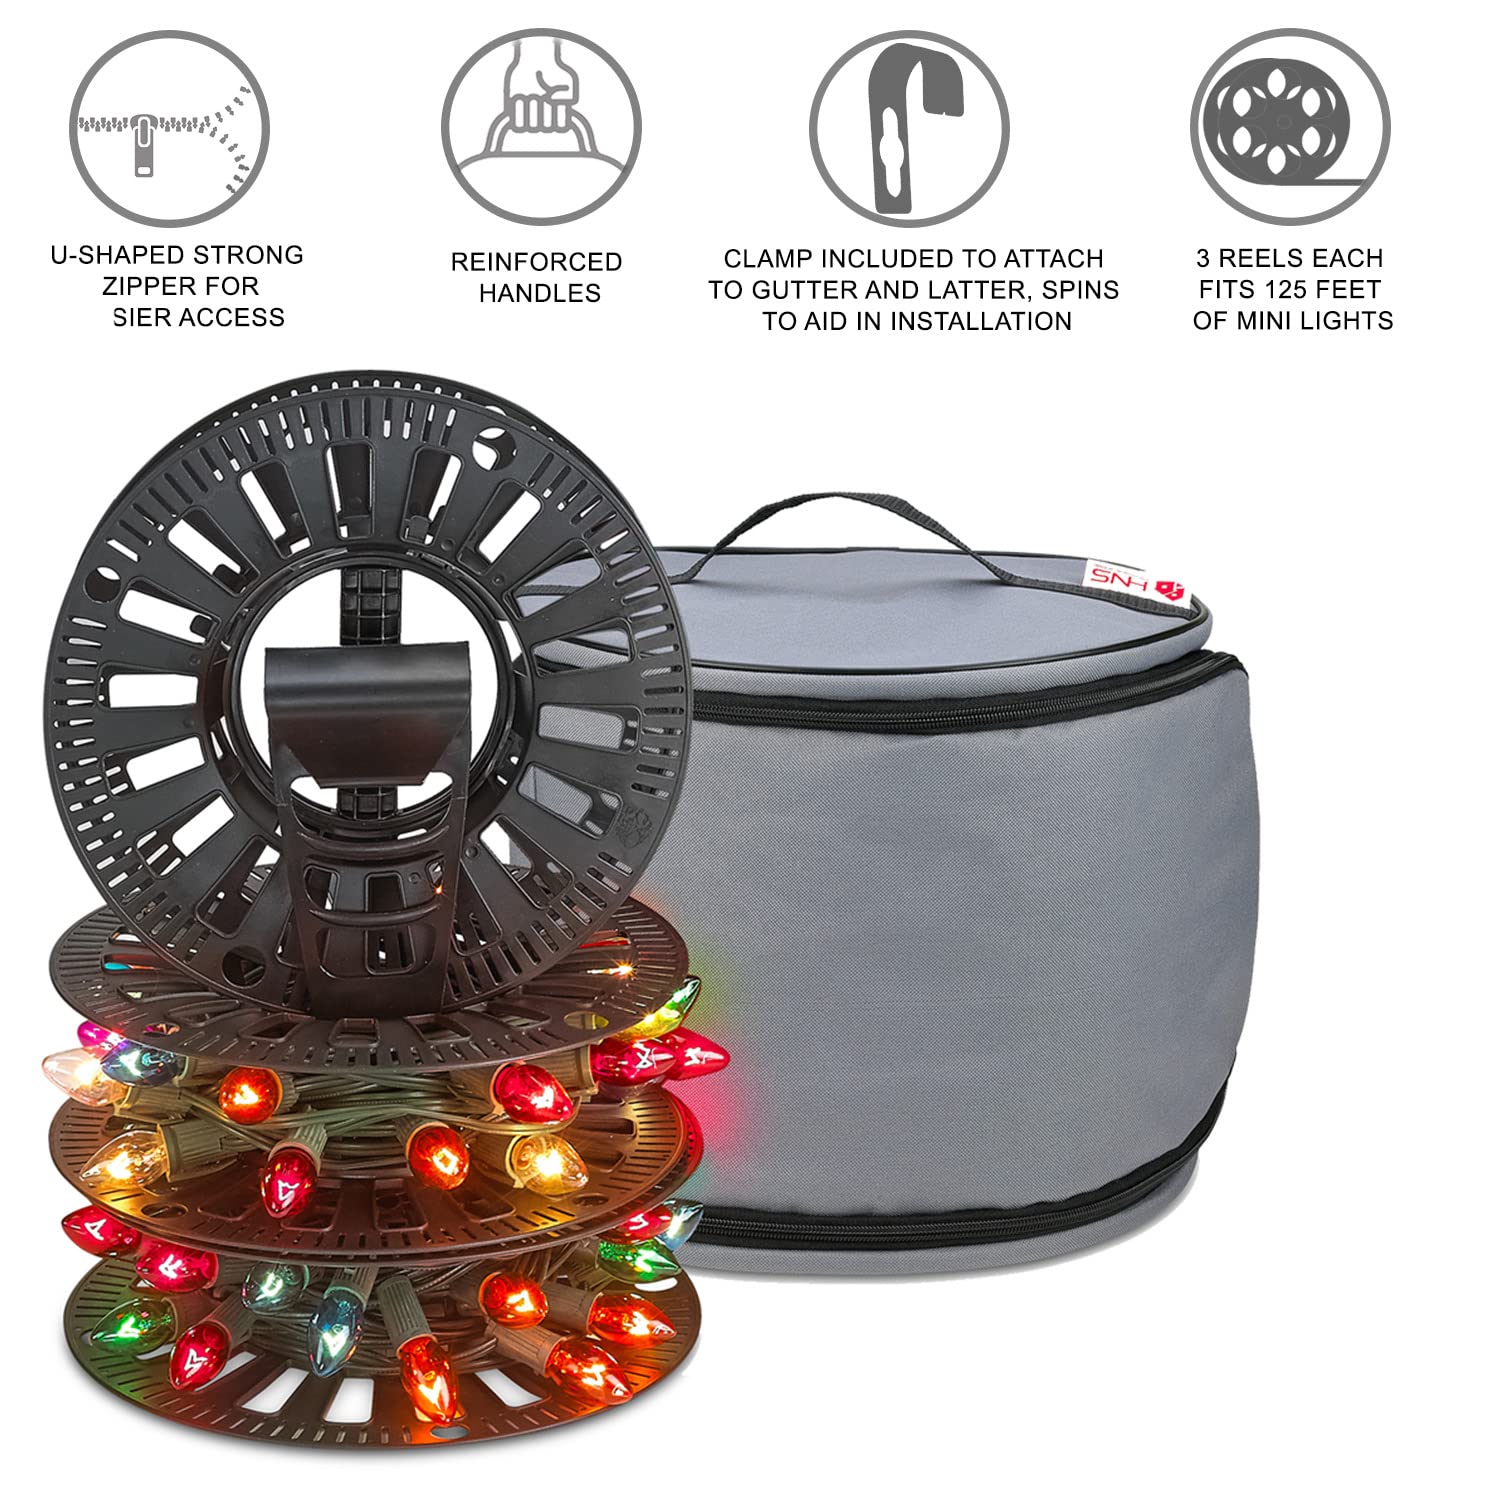 Premium Christmas Light Storage Bag – Heavy Duty Tear Proof 600D/Inside PVC Material with Reinforced Handles - with 3 Reels Stores up to 375 Ft of Mini Christmas Tree Lights & Extension Cords  - Like New